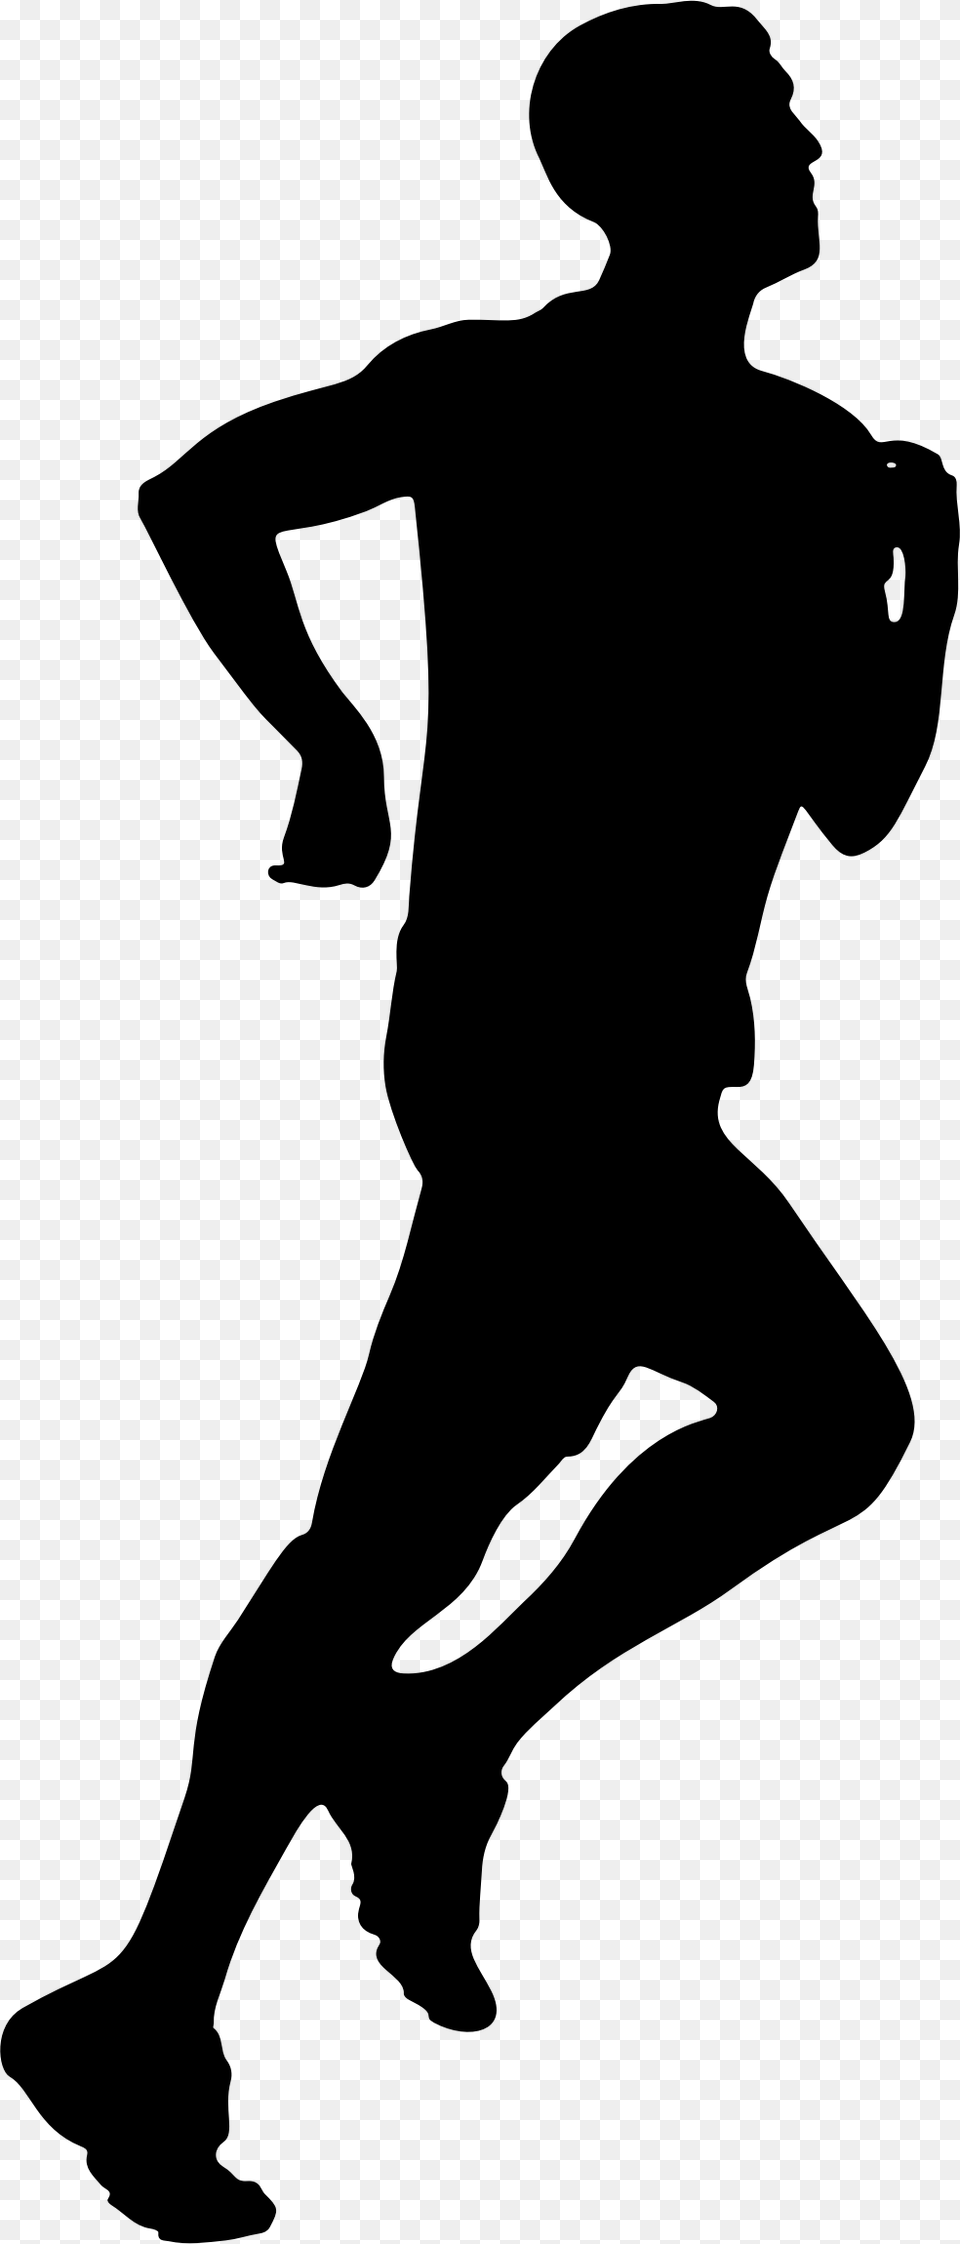 Jogging Silhouette Running Clip Art Jogging Man Silhouette, Gray Png